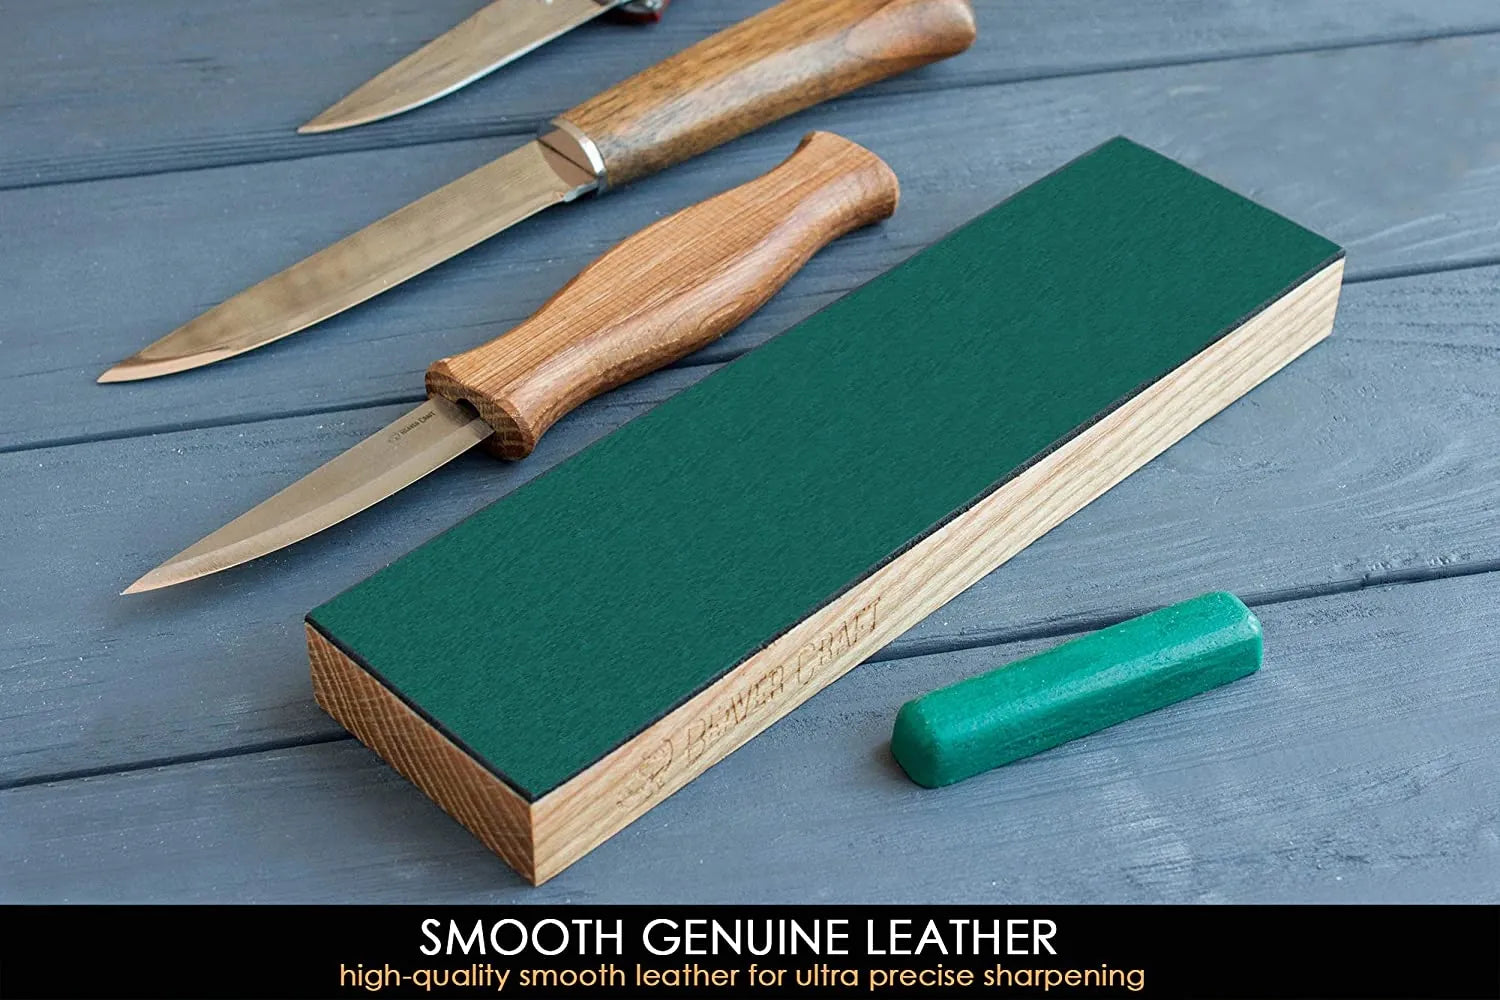 BeaverCraft LS2P11 Leather Strop Kit for Knife Sharpening C4s Wood Carving  Sloyd Knife with Leather Sheath for Whittling and Roughing Carving Knife  Strop with Green-Gray & White Polishing Compound 